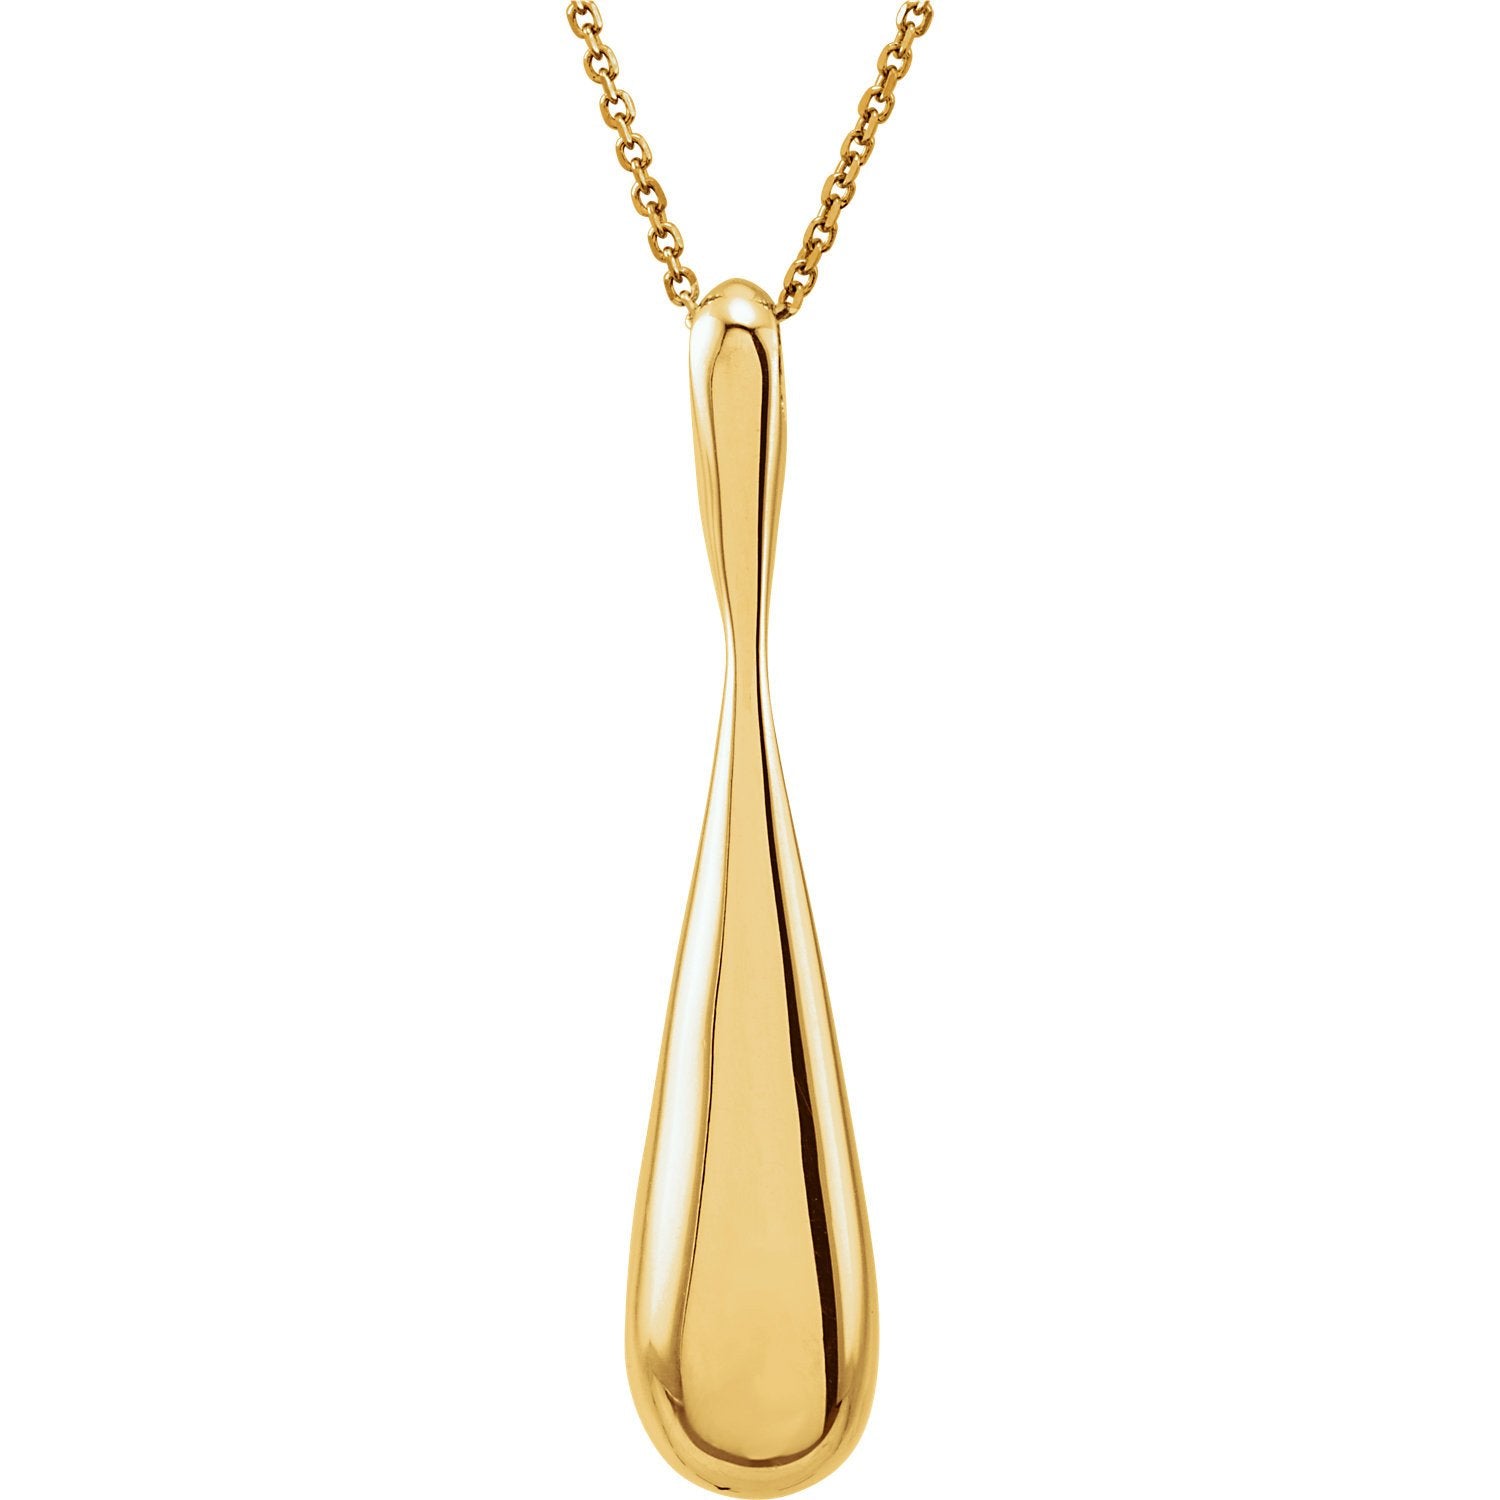 Reversable Smooth and Patterned Teardrop 18" Necklace - 14k Gold (Y, W, or R)